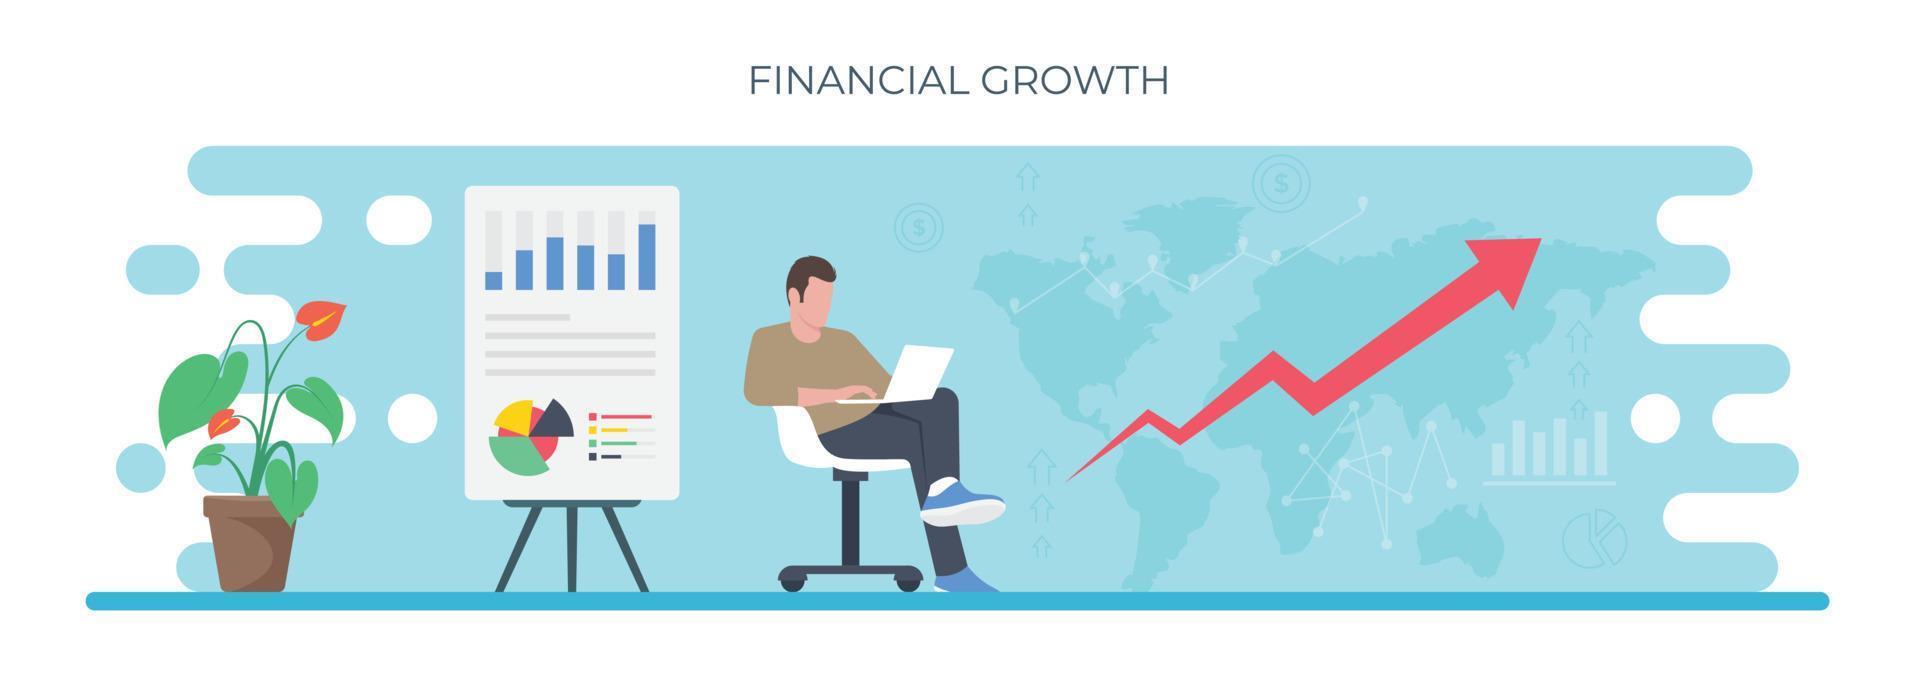 Trendy Financial Growth vector